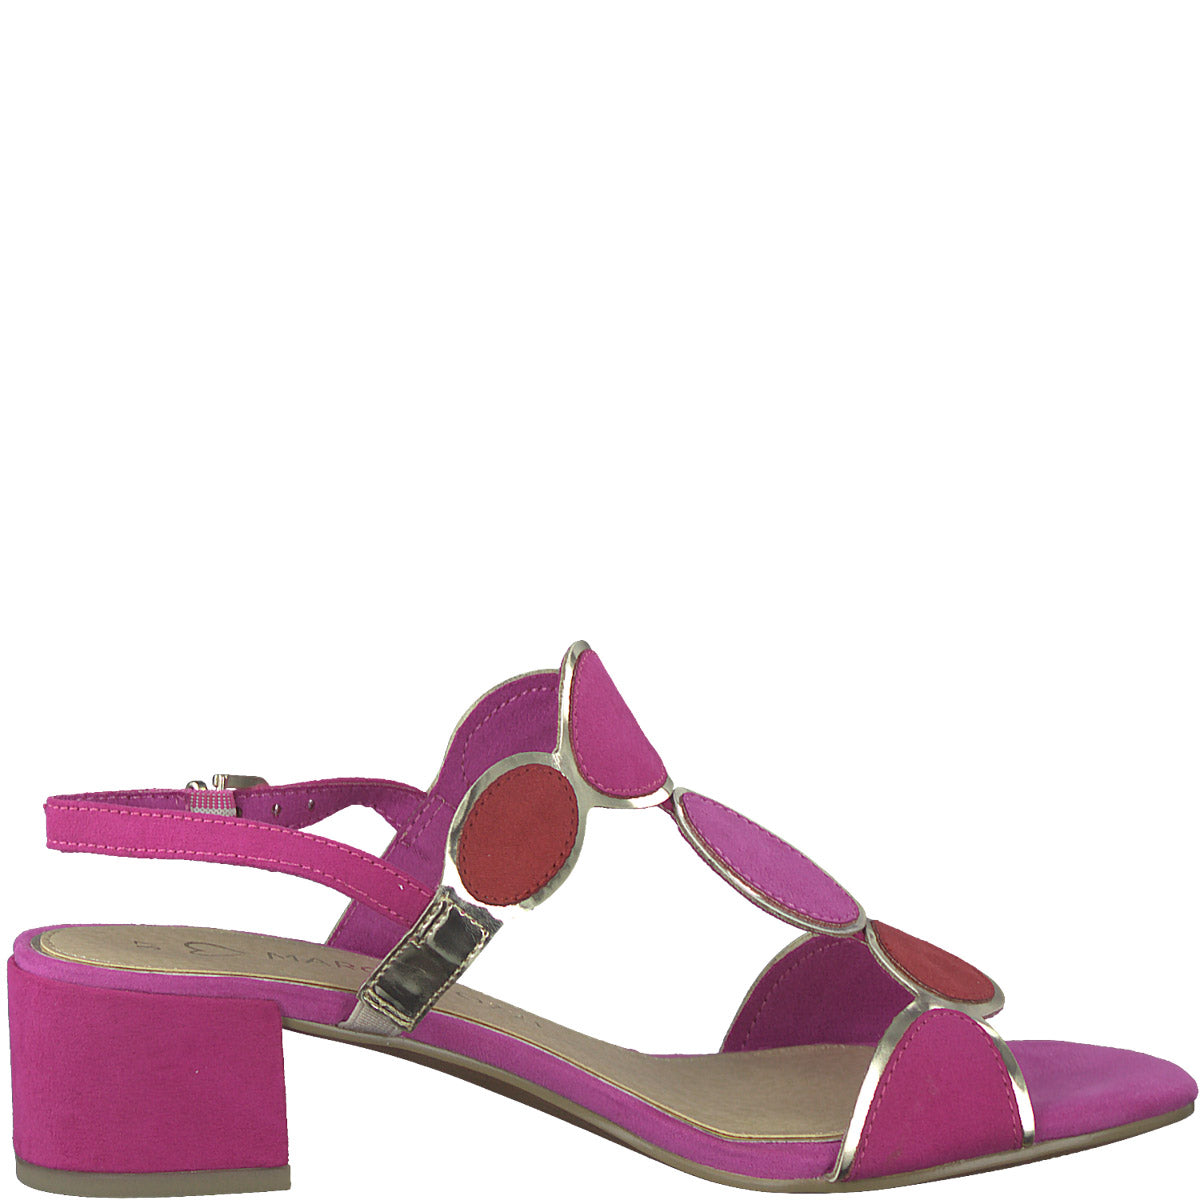 Party-Ready Red/Pink Low Heel Sandals